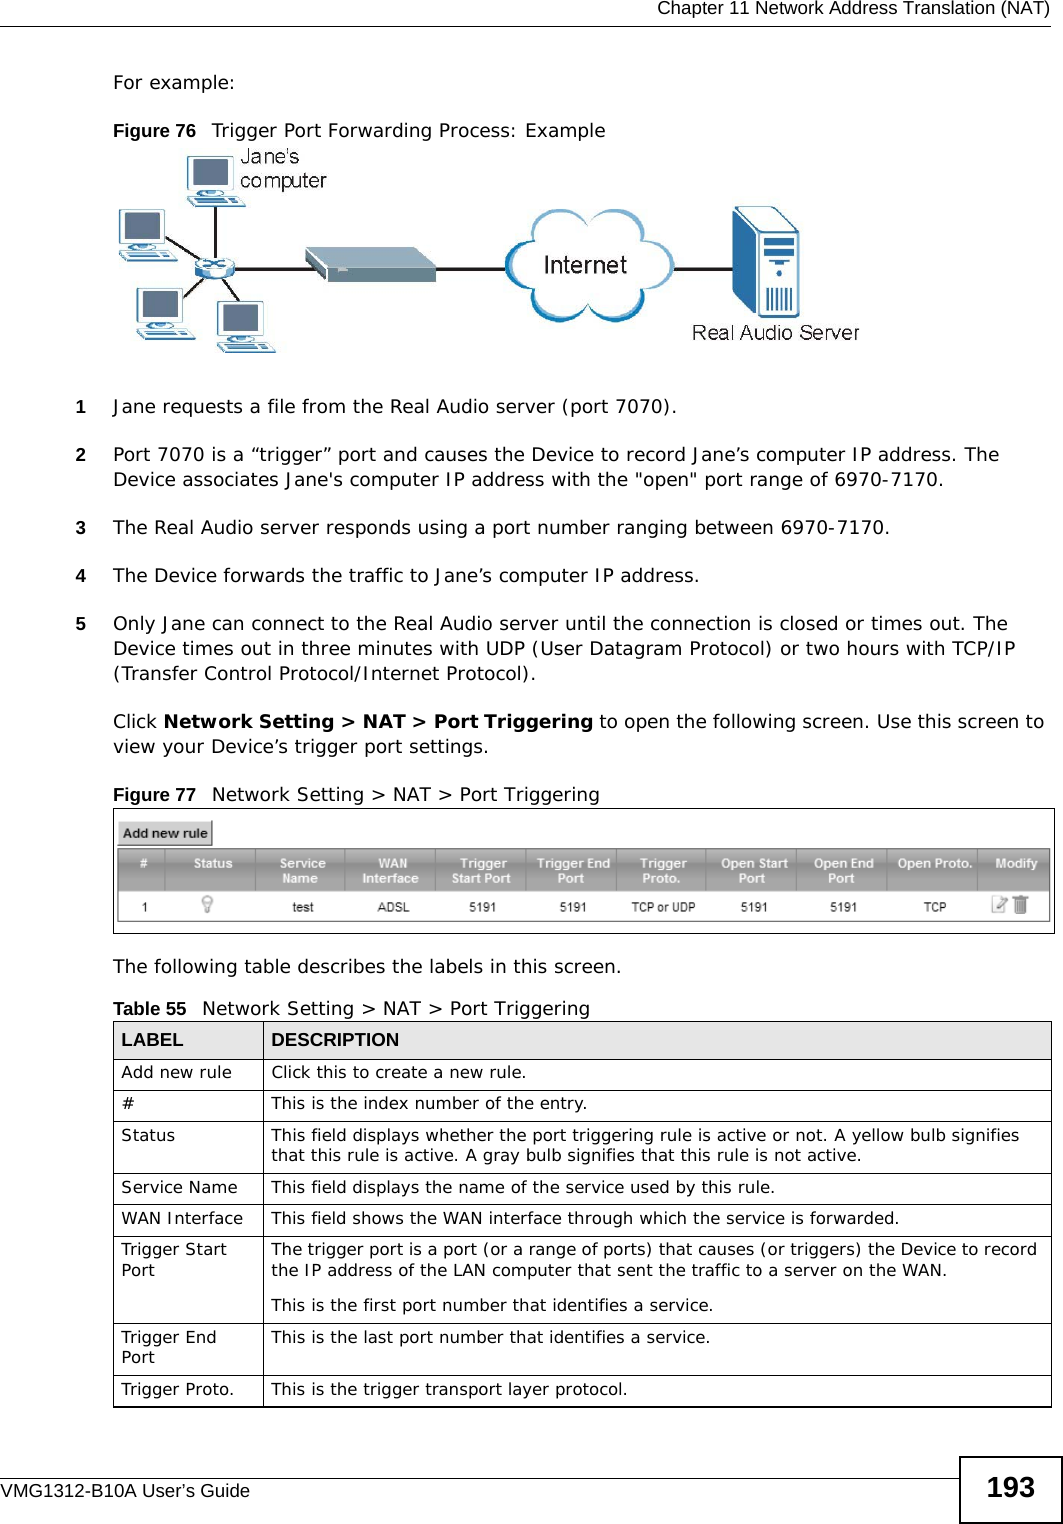  Chapter 11 Network Address Translation (NAT)VMG1312-B10A User’s Guide 193For example:Figure 76   Trigger Port Forwarding Process: Example1Jane requests a file from the Real Audio server (port 7070).2Port 7070 is a “trigger” port and causes the Device to record Jane’s computer IP address. The Device associates Jane&apos;s computer IP address with the &quot;open&quot; port range of 6970-7170.3The Real Audio server responds using a port number ranging between 6970-7170.4The Device forwards the traffic to Jane’s computer IP address. 5Only Jane can connect to the Real Audio server until the connection is closed or times out. The Device times out in three minutes with UDP (User Datagram Protocol) or two hours with TCP/IP (Transfer Control Protocol/Internet Protocol). Click Network Setting &gt; NAT &gt; Port Triggering to open the following screen. Use this screen to view your Device’s trigger port settings.Figure 77   Network Setting &gt; NAT &gt; Port Triggering The following table describes the labels in this screen. Table 55   Network Setting &gt; NAT &gt; Port TriggeringLABEL DESCRIPTIONAdd new rule Click this to create a new rule.#This is the index number of the entry.Status This field displays whether the port triggering rule is active or not. A yellow bulb signifies that this rule is active. A gray bulb signifies that this rule is not active.Service Name This field displays the name of the service used by this rule.WAN Interface This field shows the WAN interface through which the service is forwarded.Trigger Start Port The trigger port is a port (or a range of ports) that causes (or triggers) the Device to record the IP address of the LAN computer that sent the traffic to a server on the WAN.This is the first port number that identifies a service.Trigger End Port This is the last port number that identifies a service.Trigger Proto. This is the trigger transport layer protocol. 